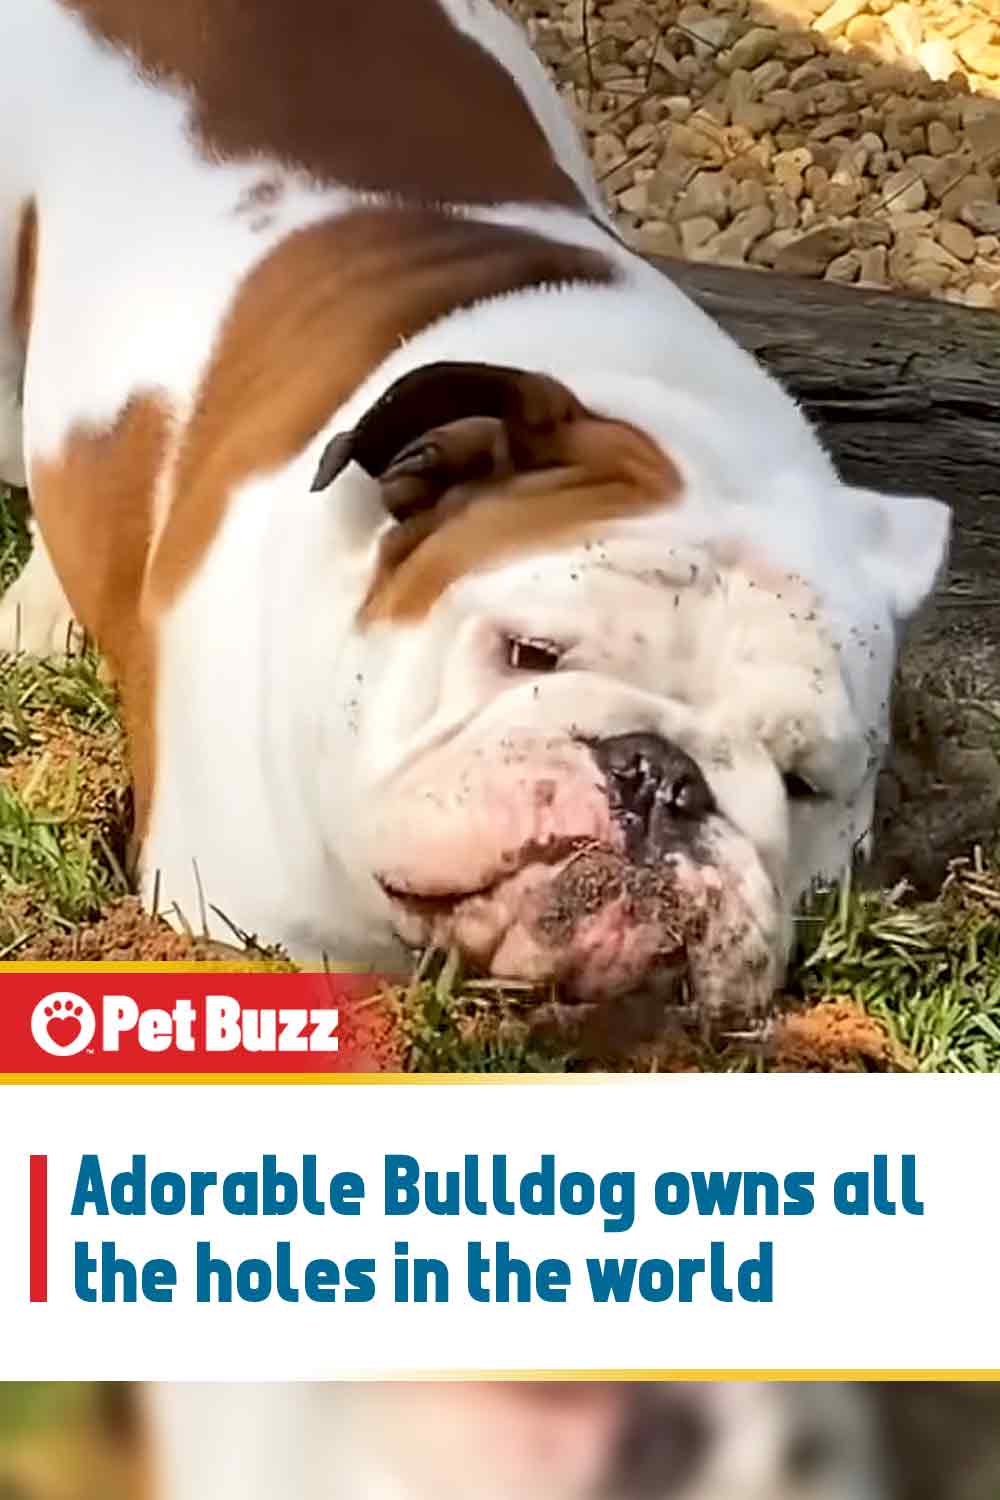 Adorable Bulldog owns all the holes in the world